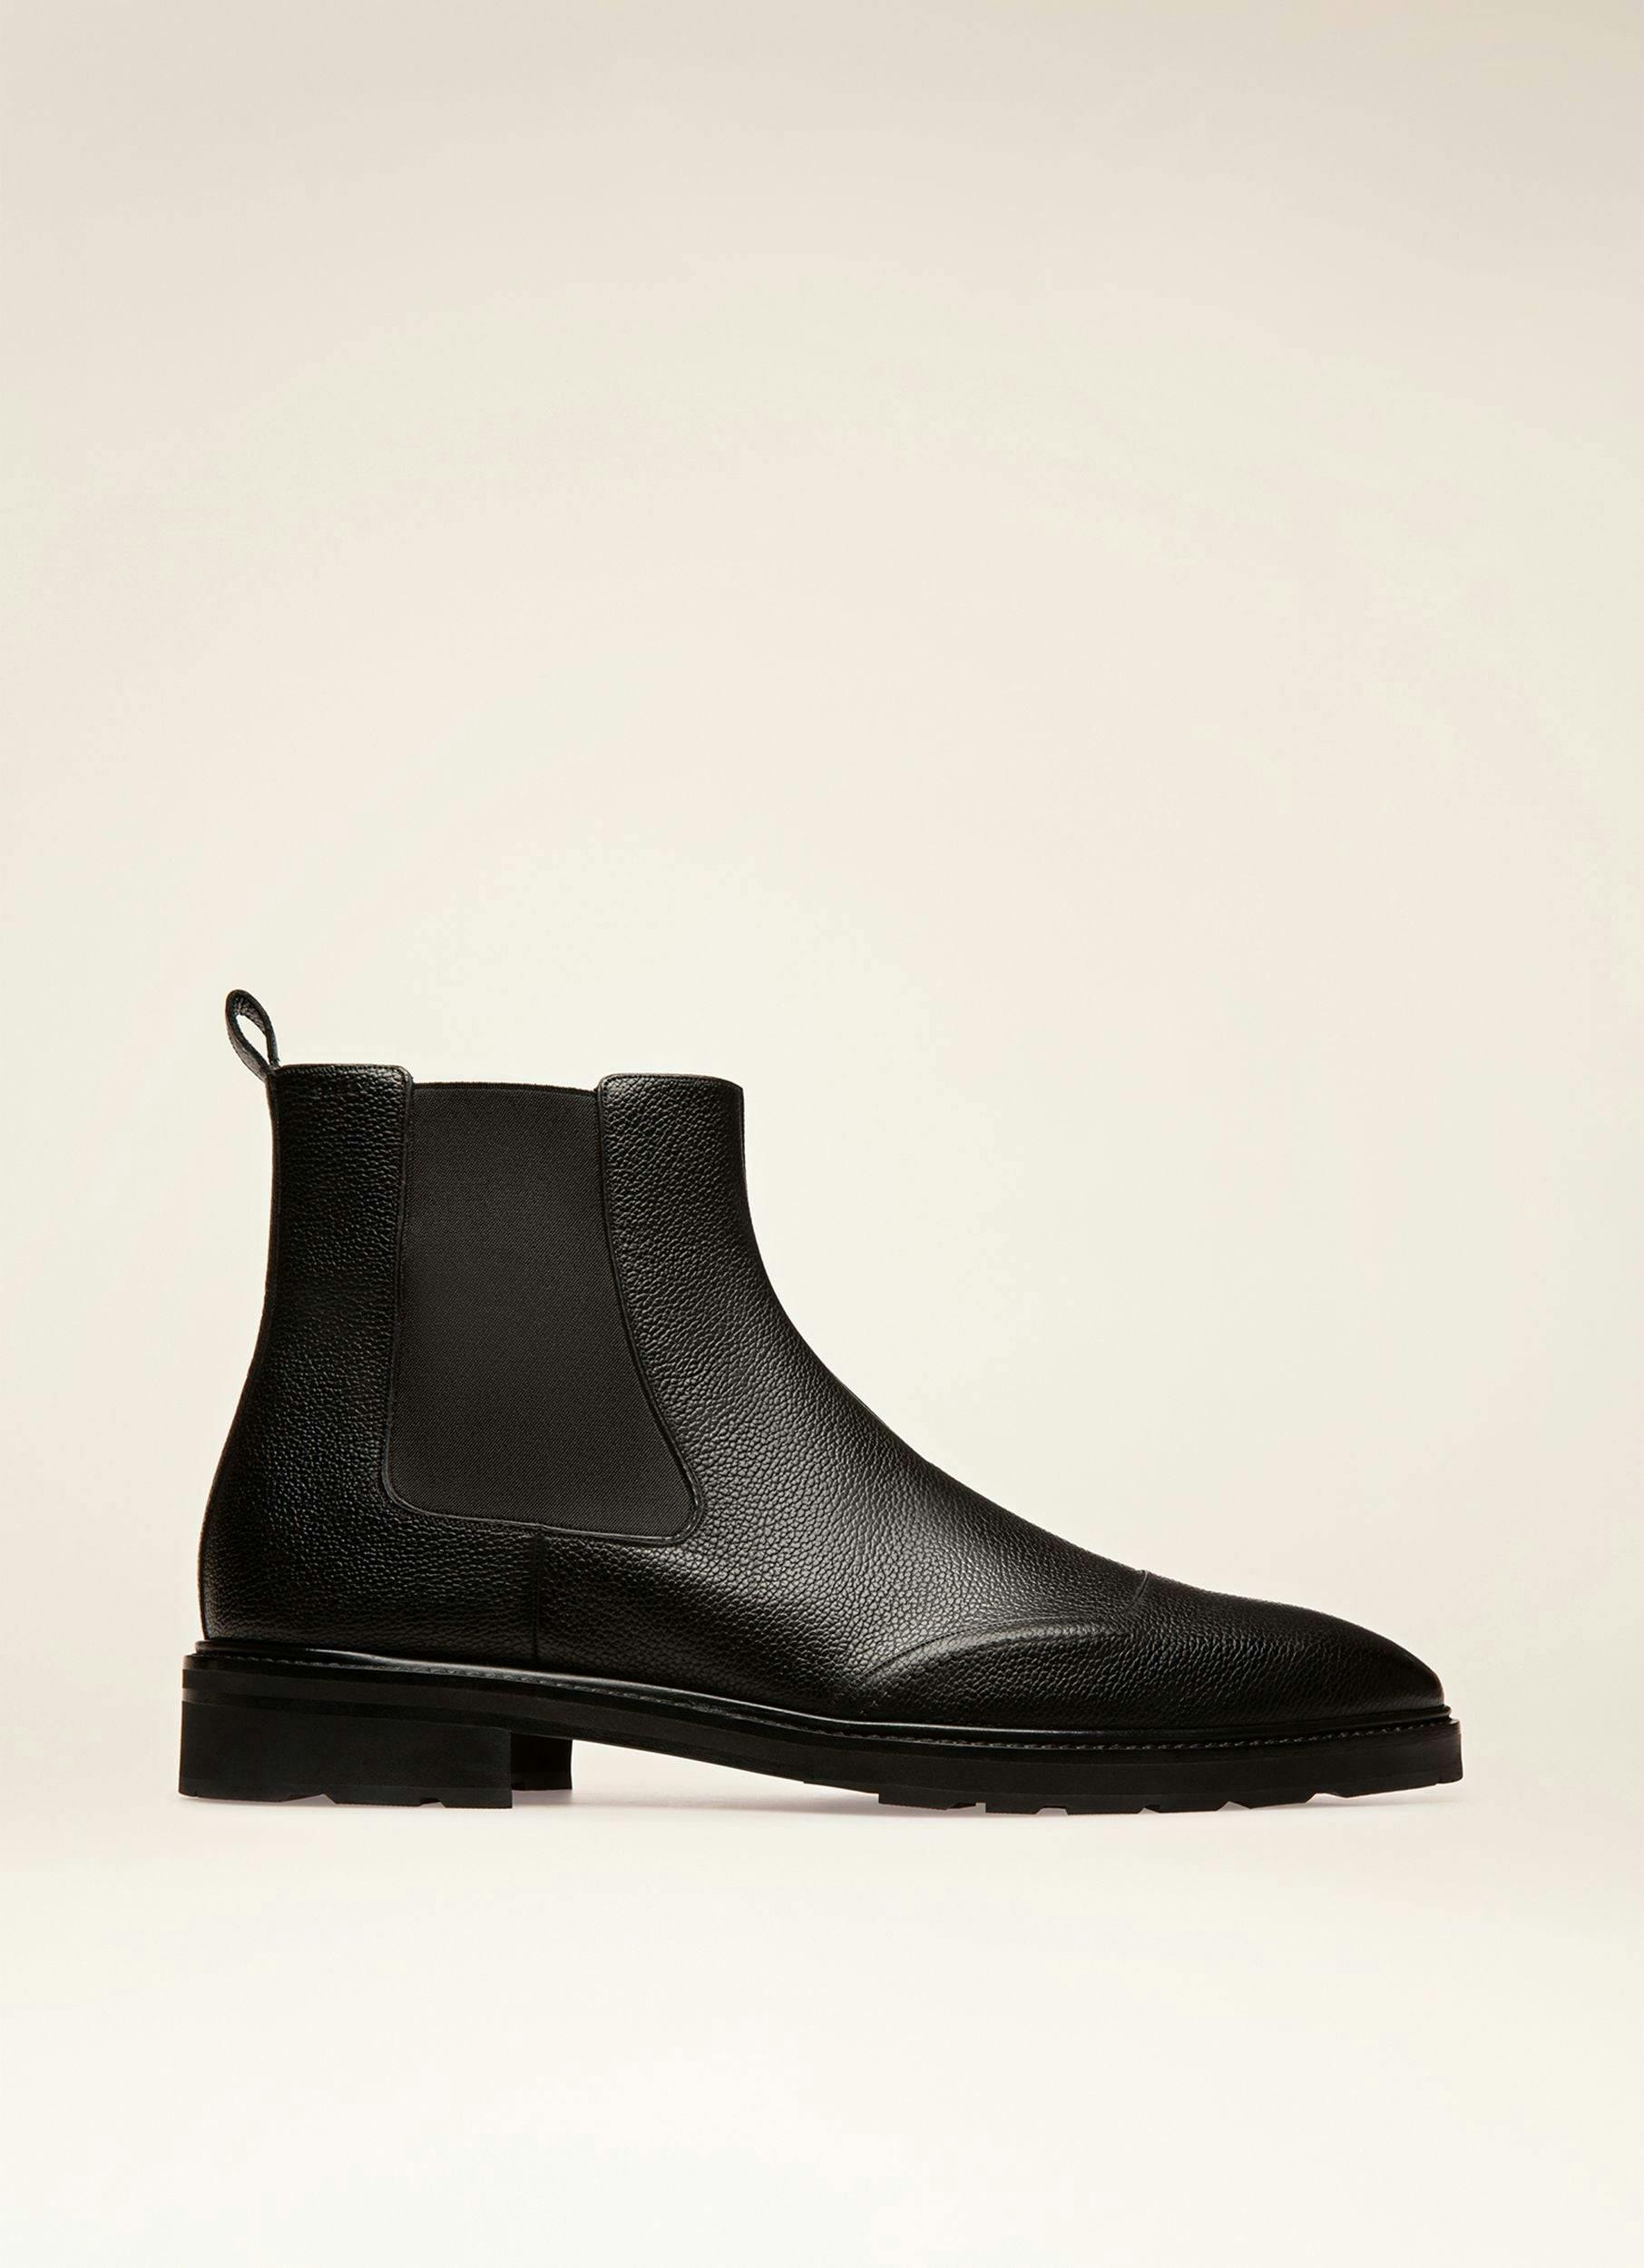 MEYRIN Leather Boots In Black - Men's - Bally - 01